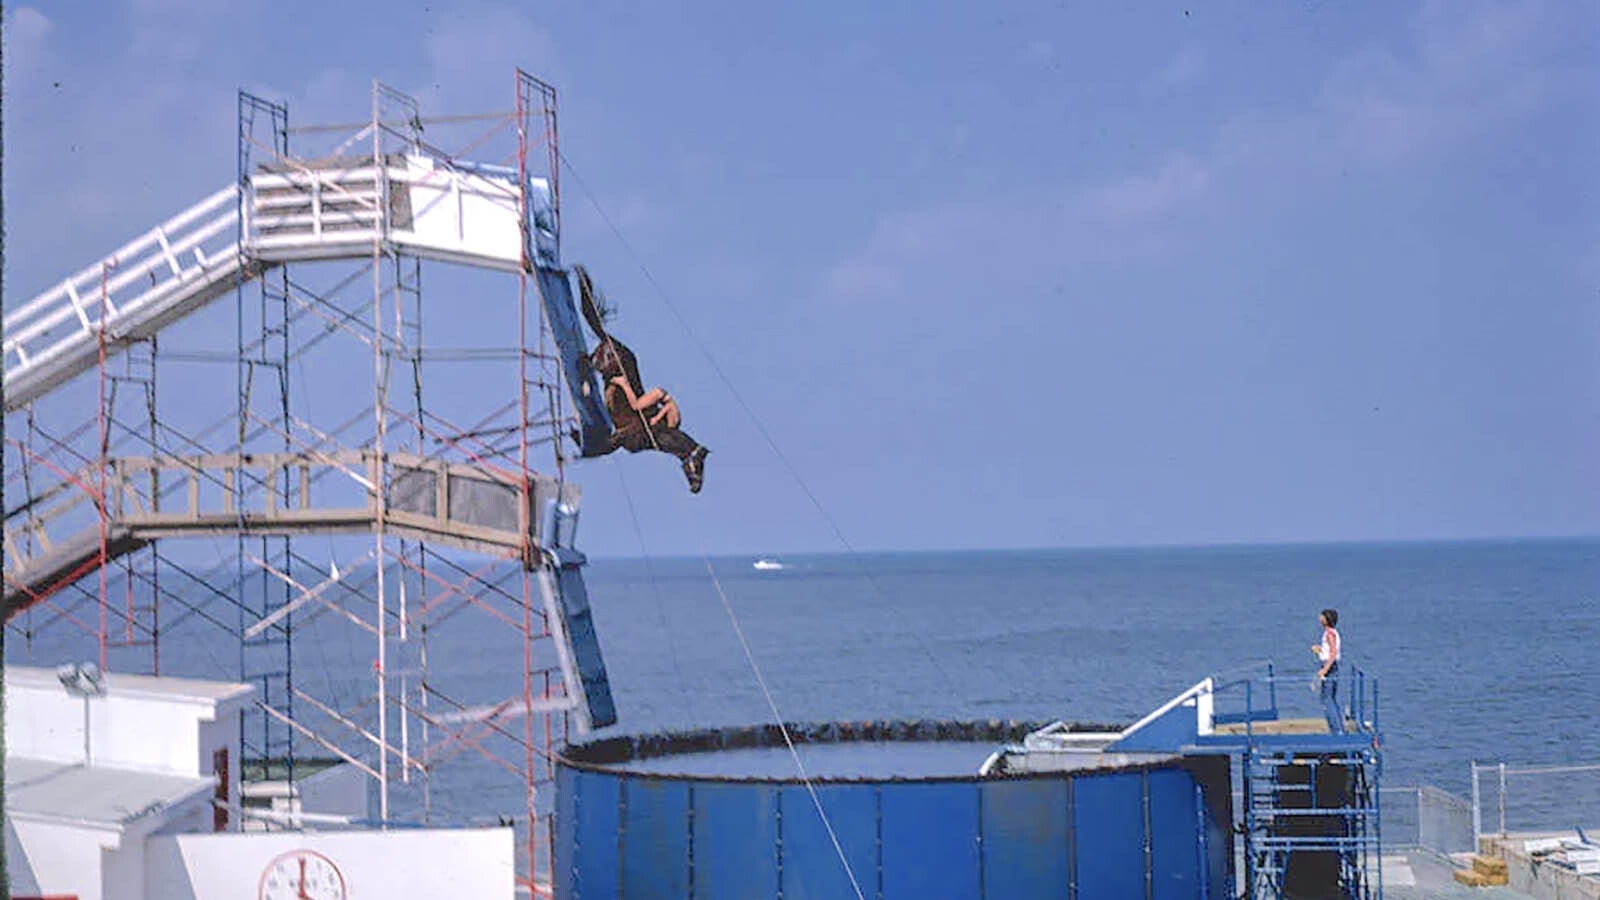 A horse takes a practice dive at Atlantic City's Steel Pier Park in 1978.